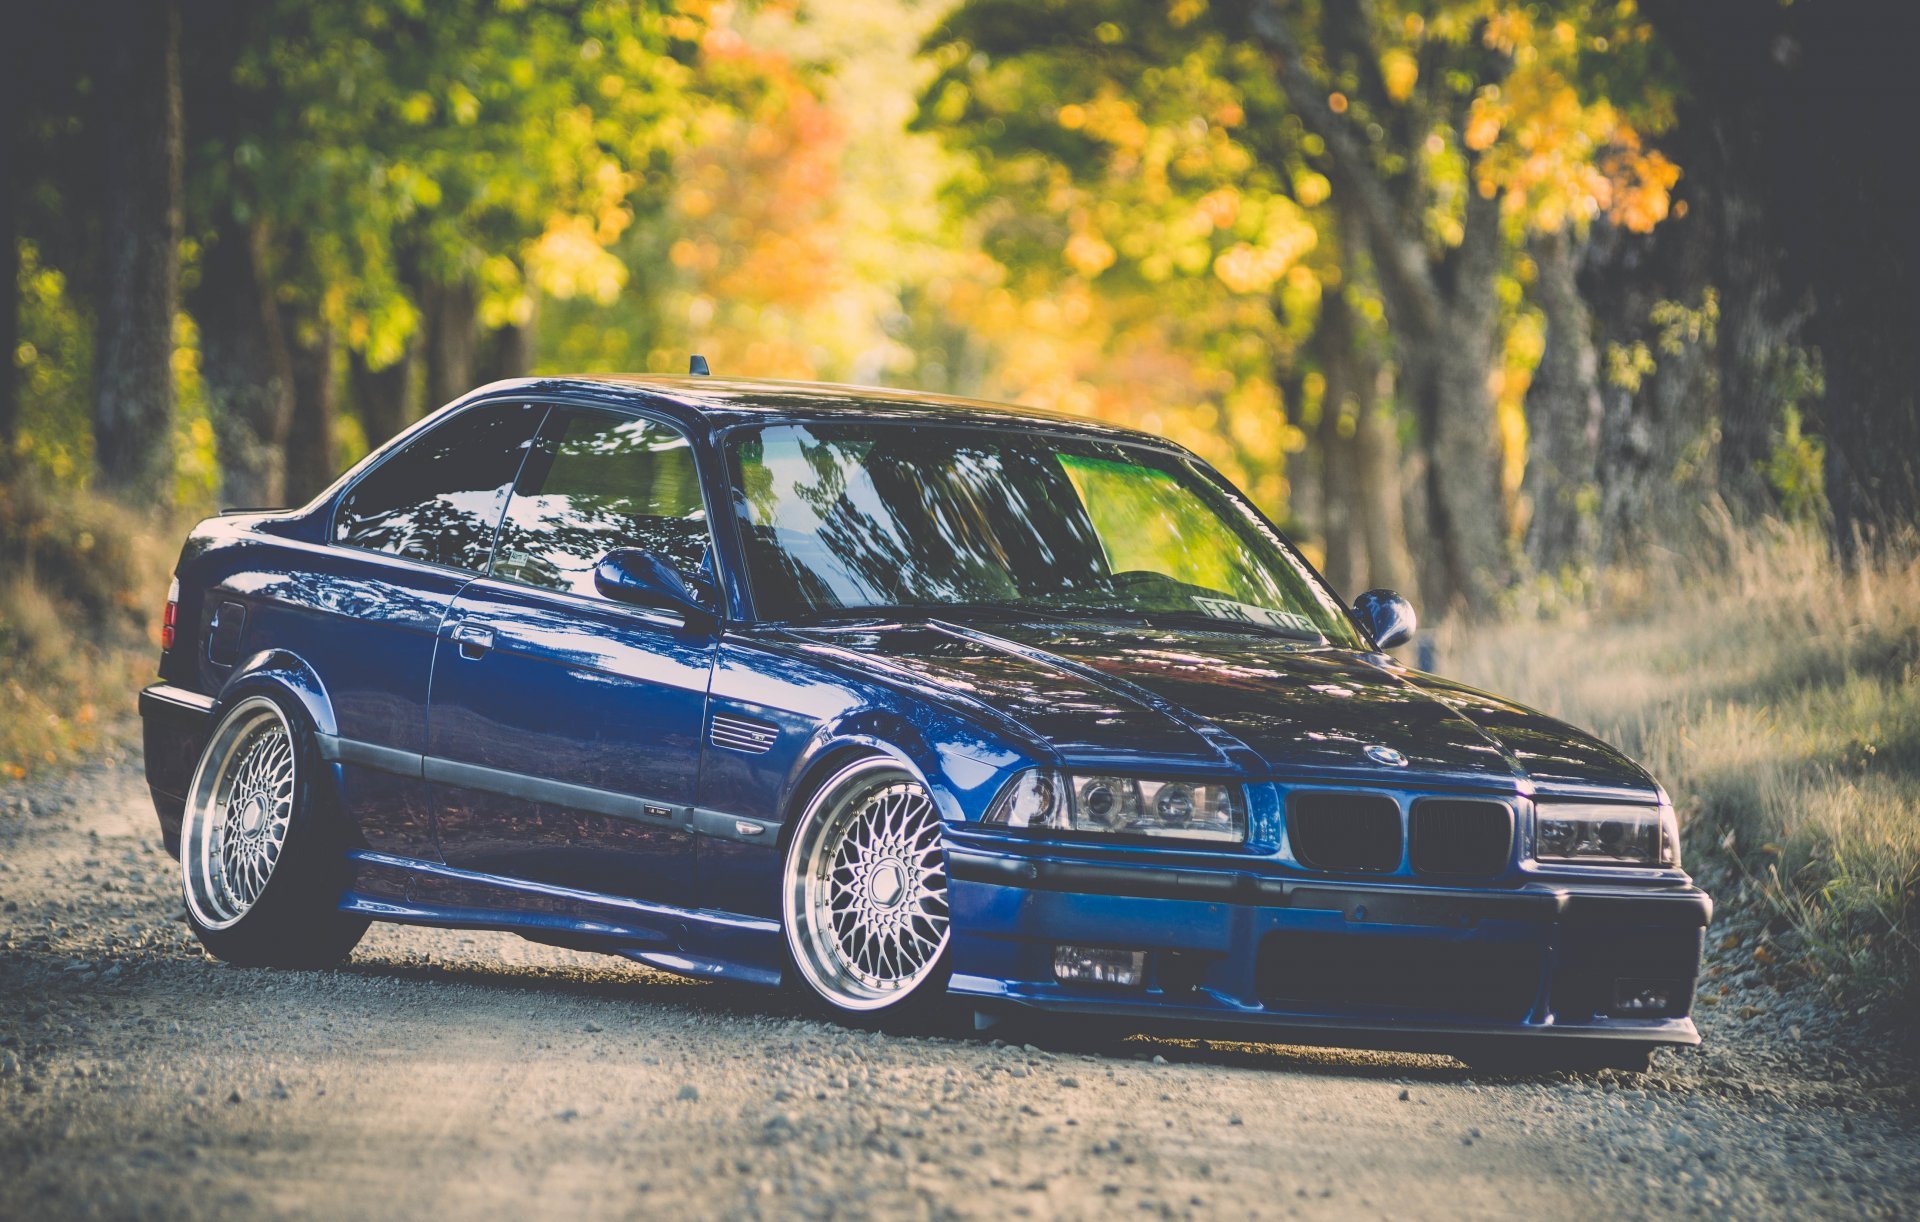 Free Download Bmw E36 M3 Bmw Tuning Stance Blue Hd Wallpaper 1920x1222 For Your Desktop Mobile Tablet Explore 74 Bmw E36 M3 Wallpaper Bmw M3 Hd Wallpaper